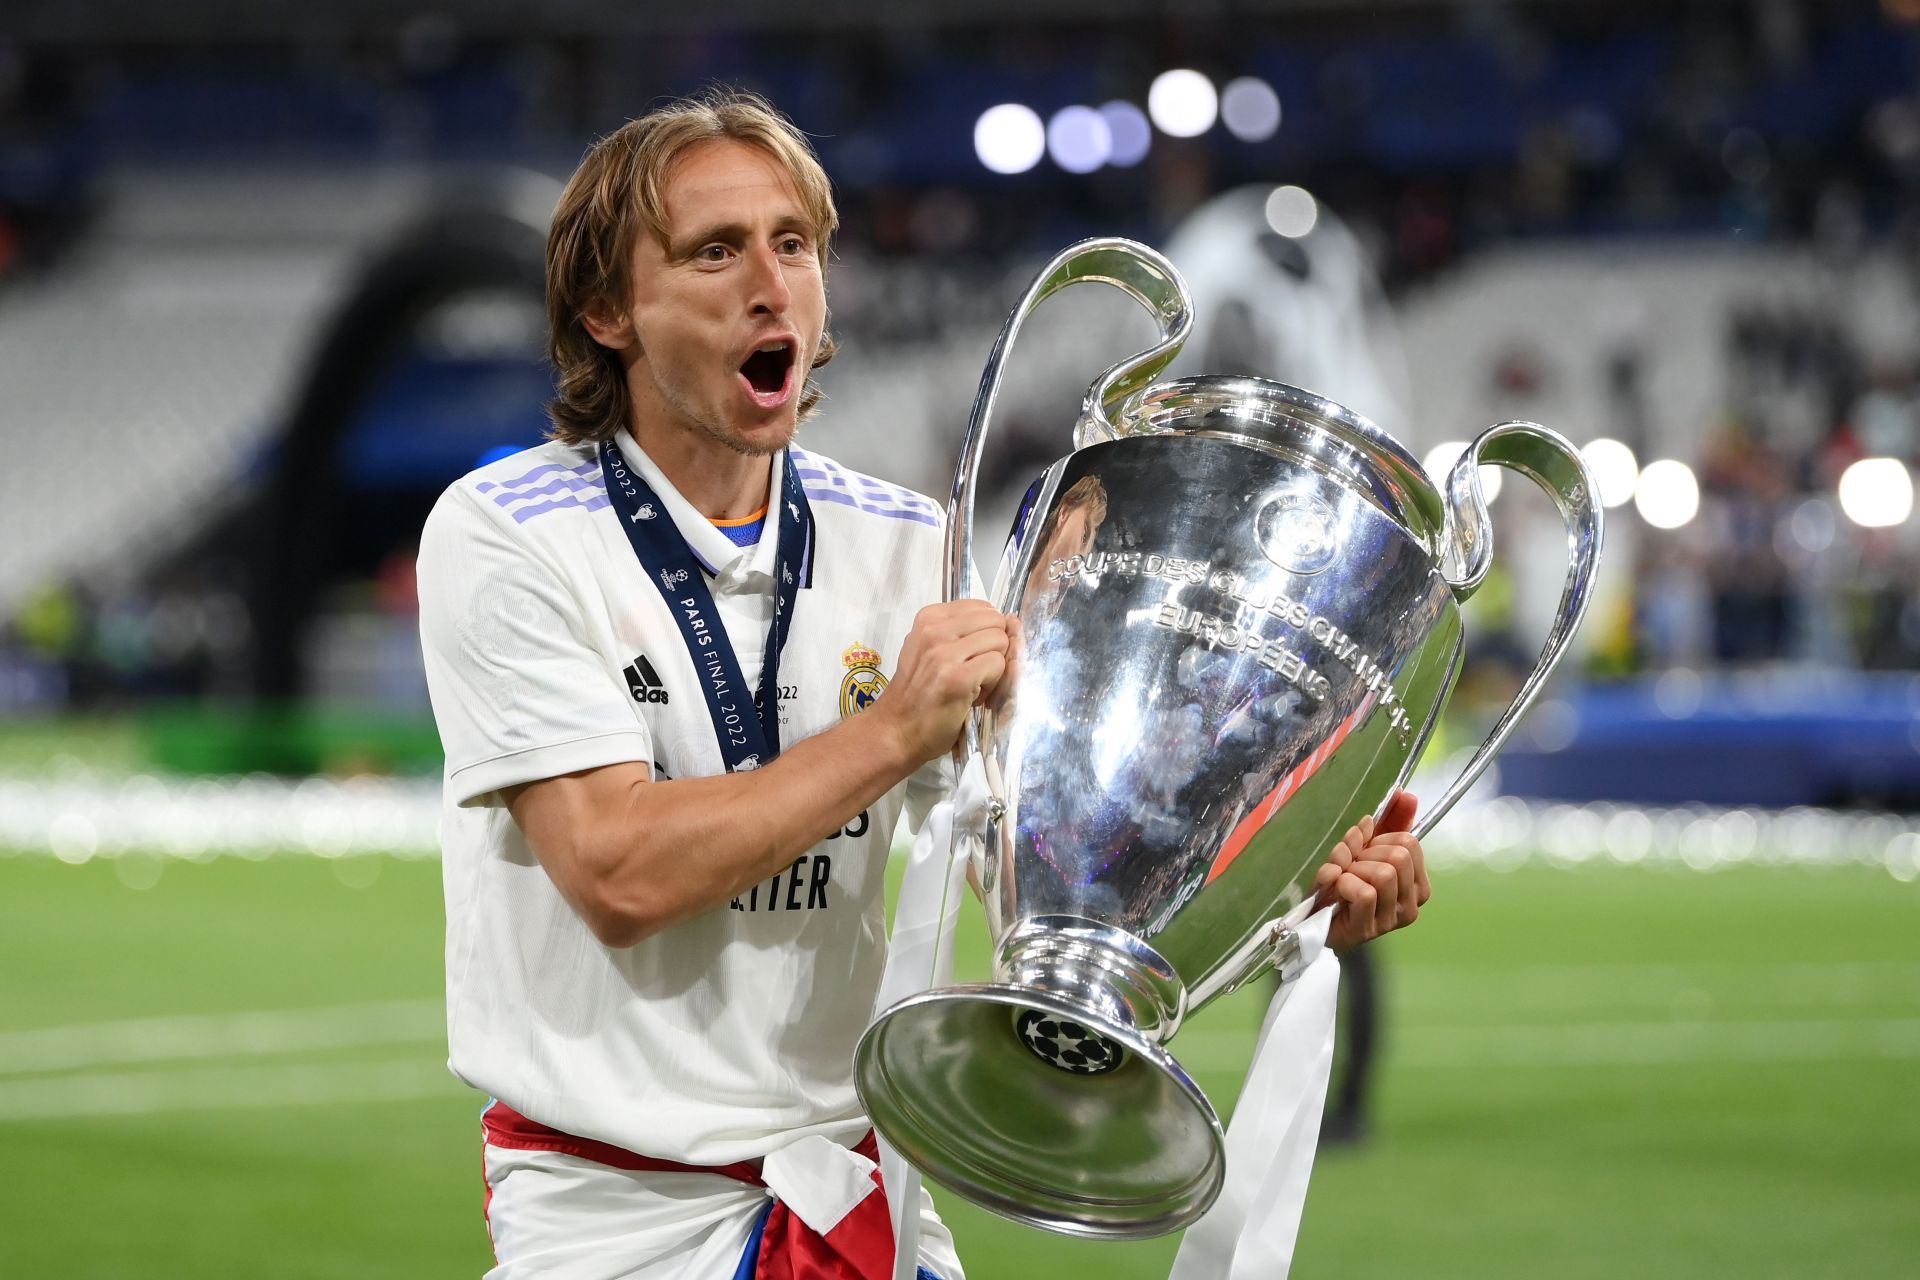 Luka Modric stands tall among current players